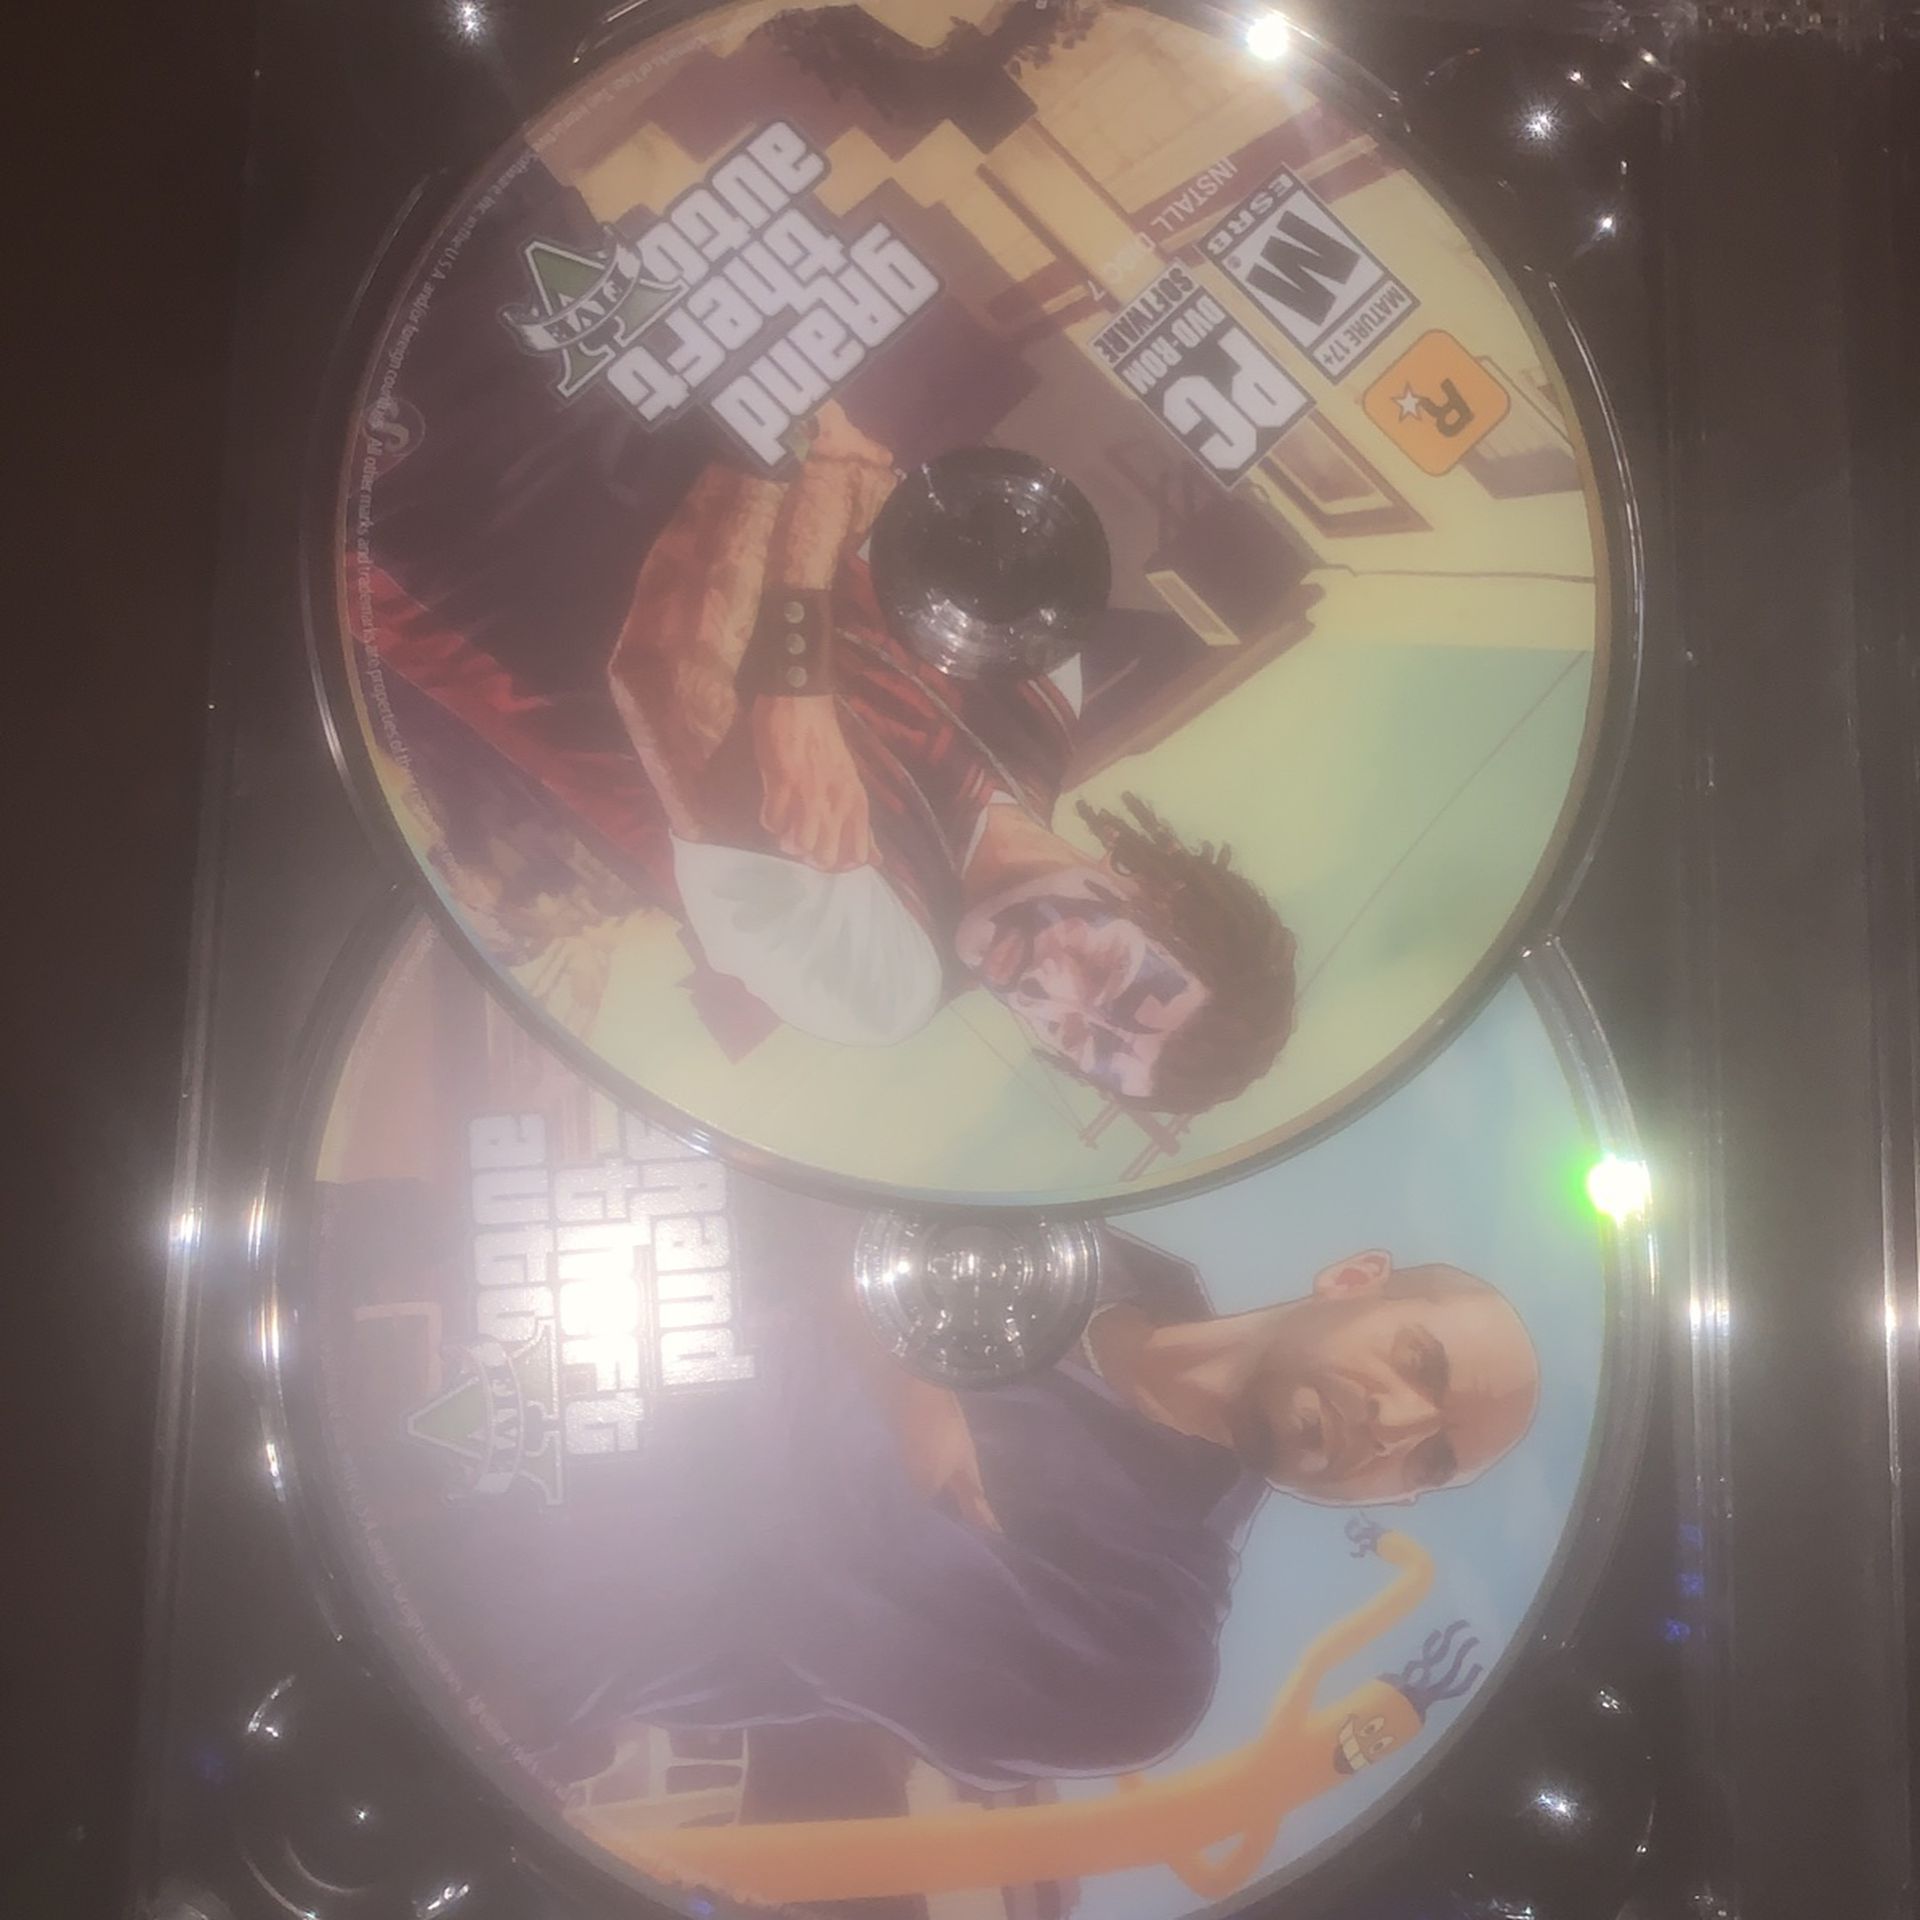 Gta 5 All Disc For Pc